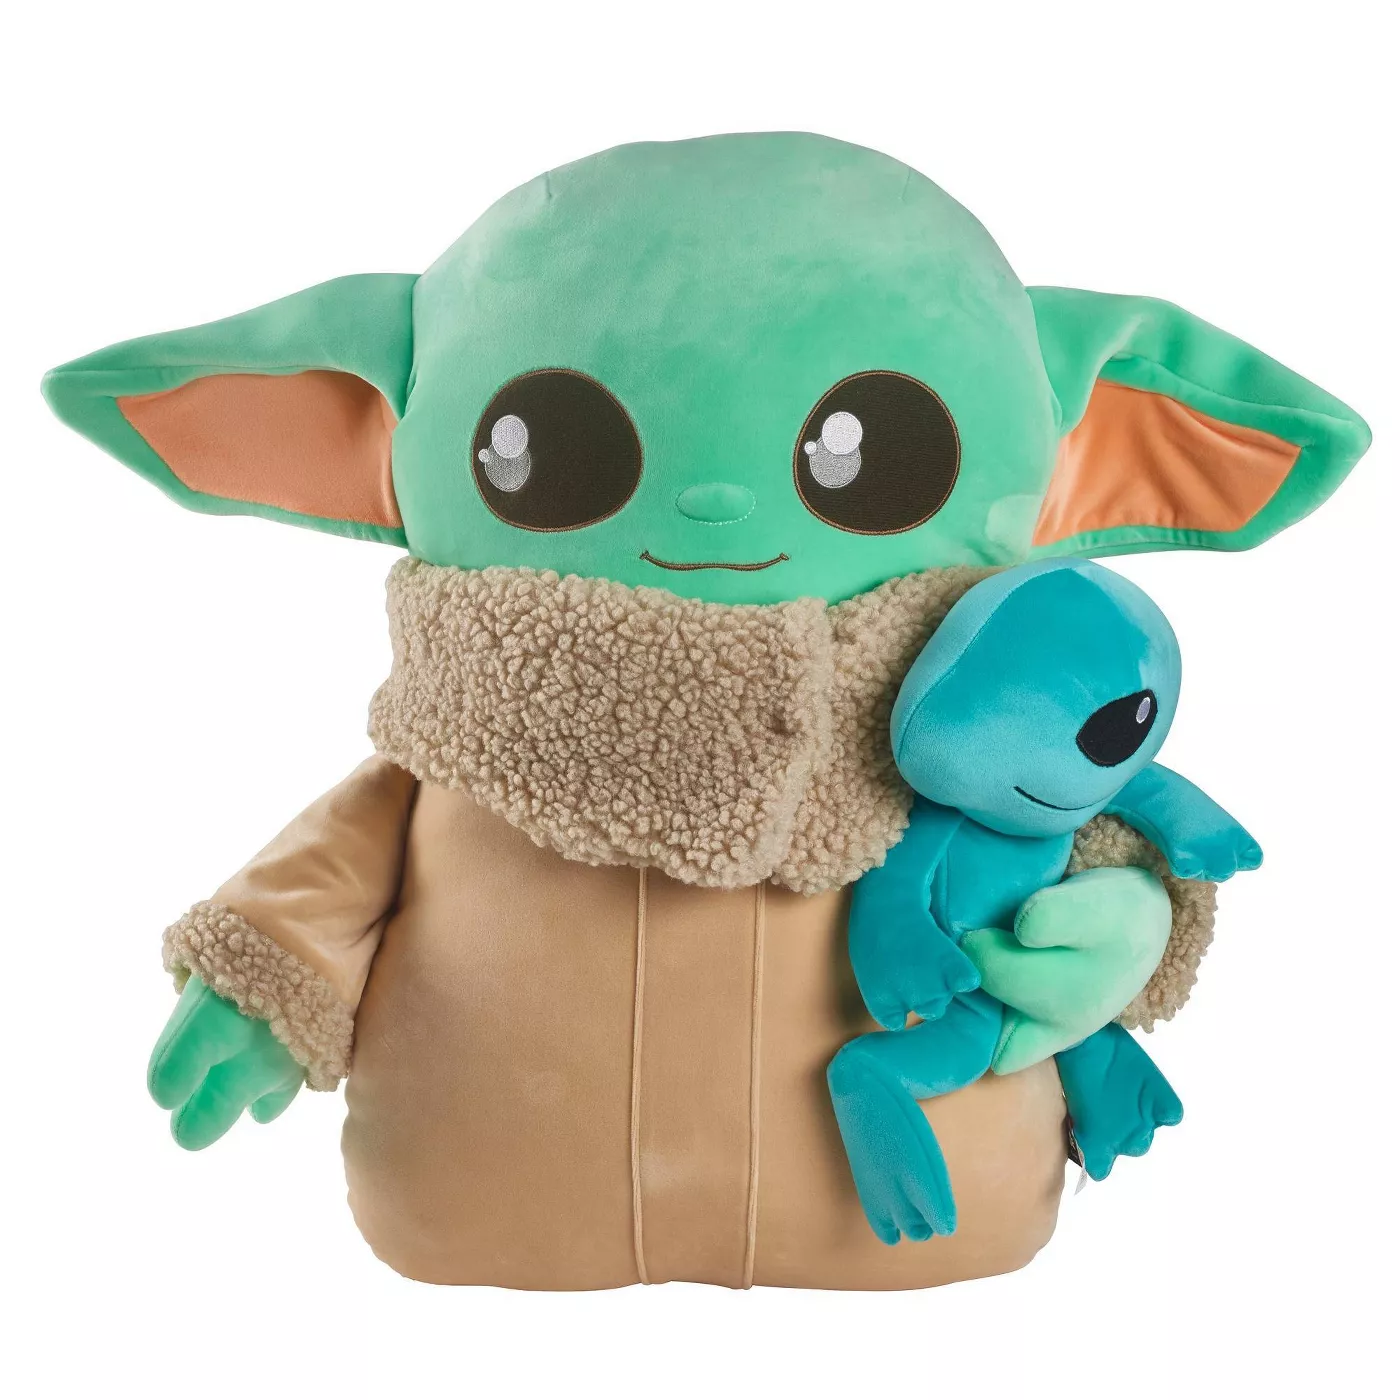 Star Wars The Child Ginormous Cuddle Plush - image 1 of 7